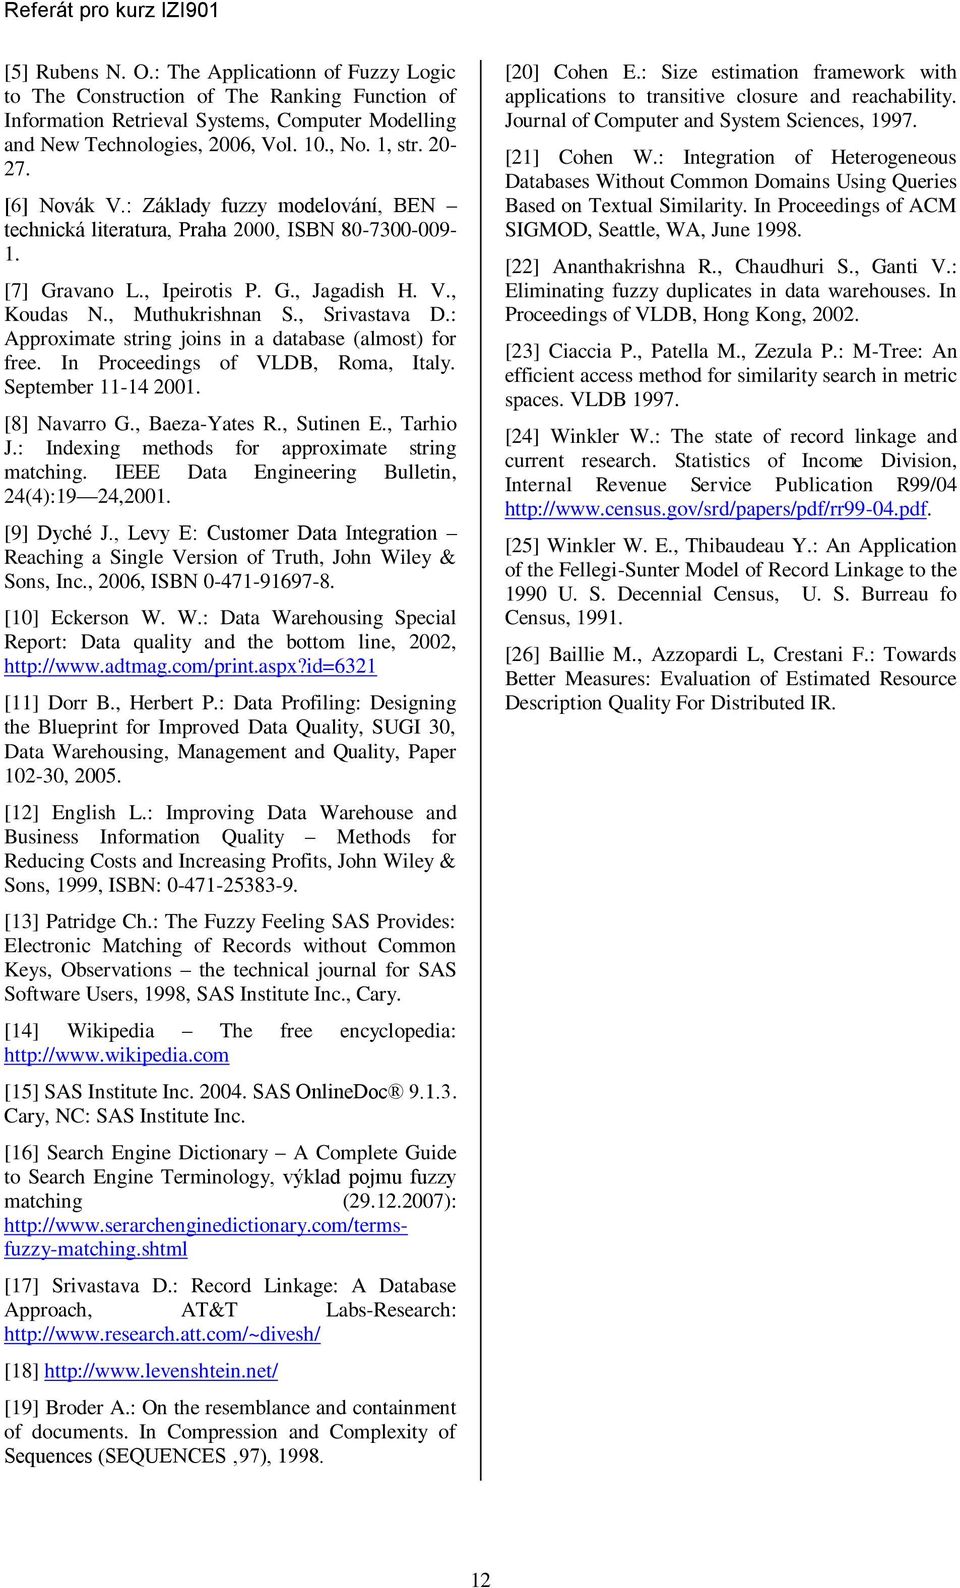 : Approxmate strng jons n a database (almost) for free. In Proceedngs of VLDB, Roma, Italy. September 11-14 2001. [8] Navarro G., Baeza-Yates R., Sutnen E., Tarho J.